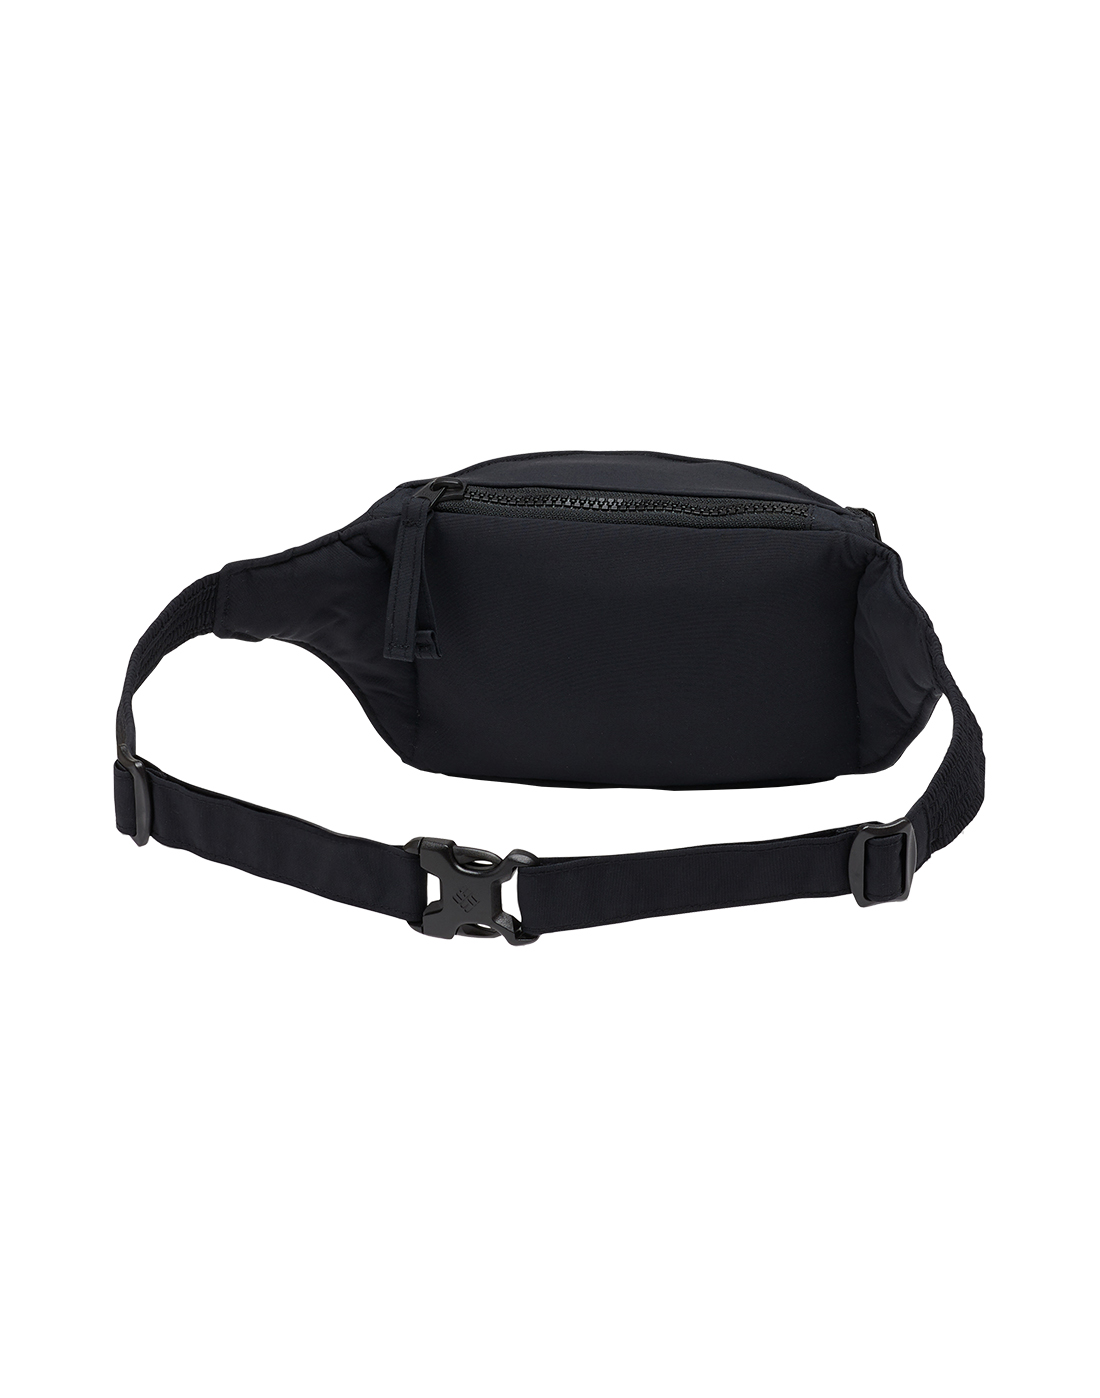 Columbia POPO Pack Waistbag - Black | Life Style Sports IE